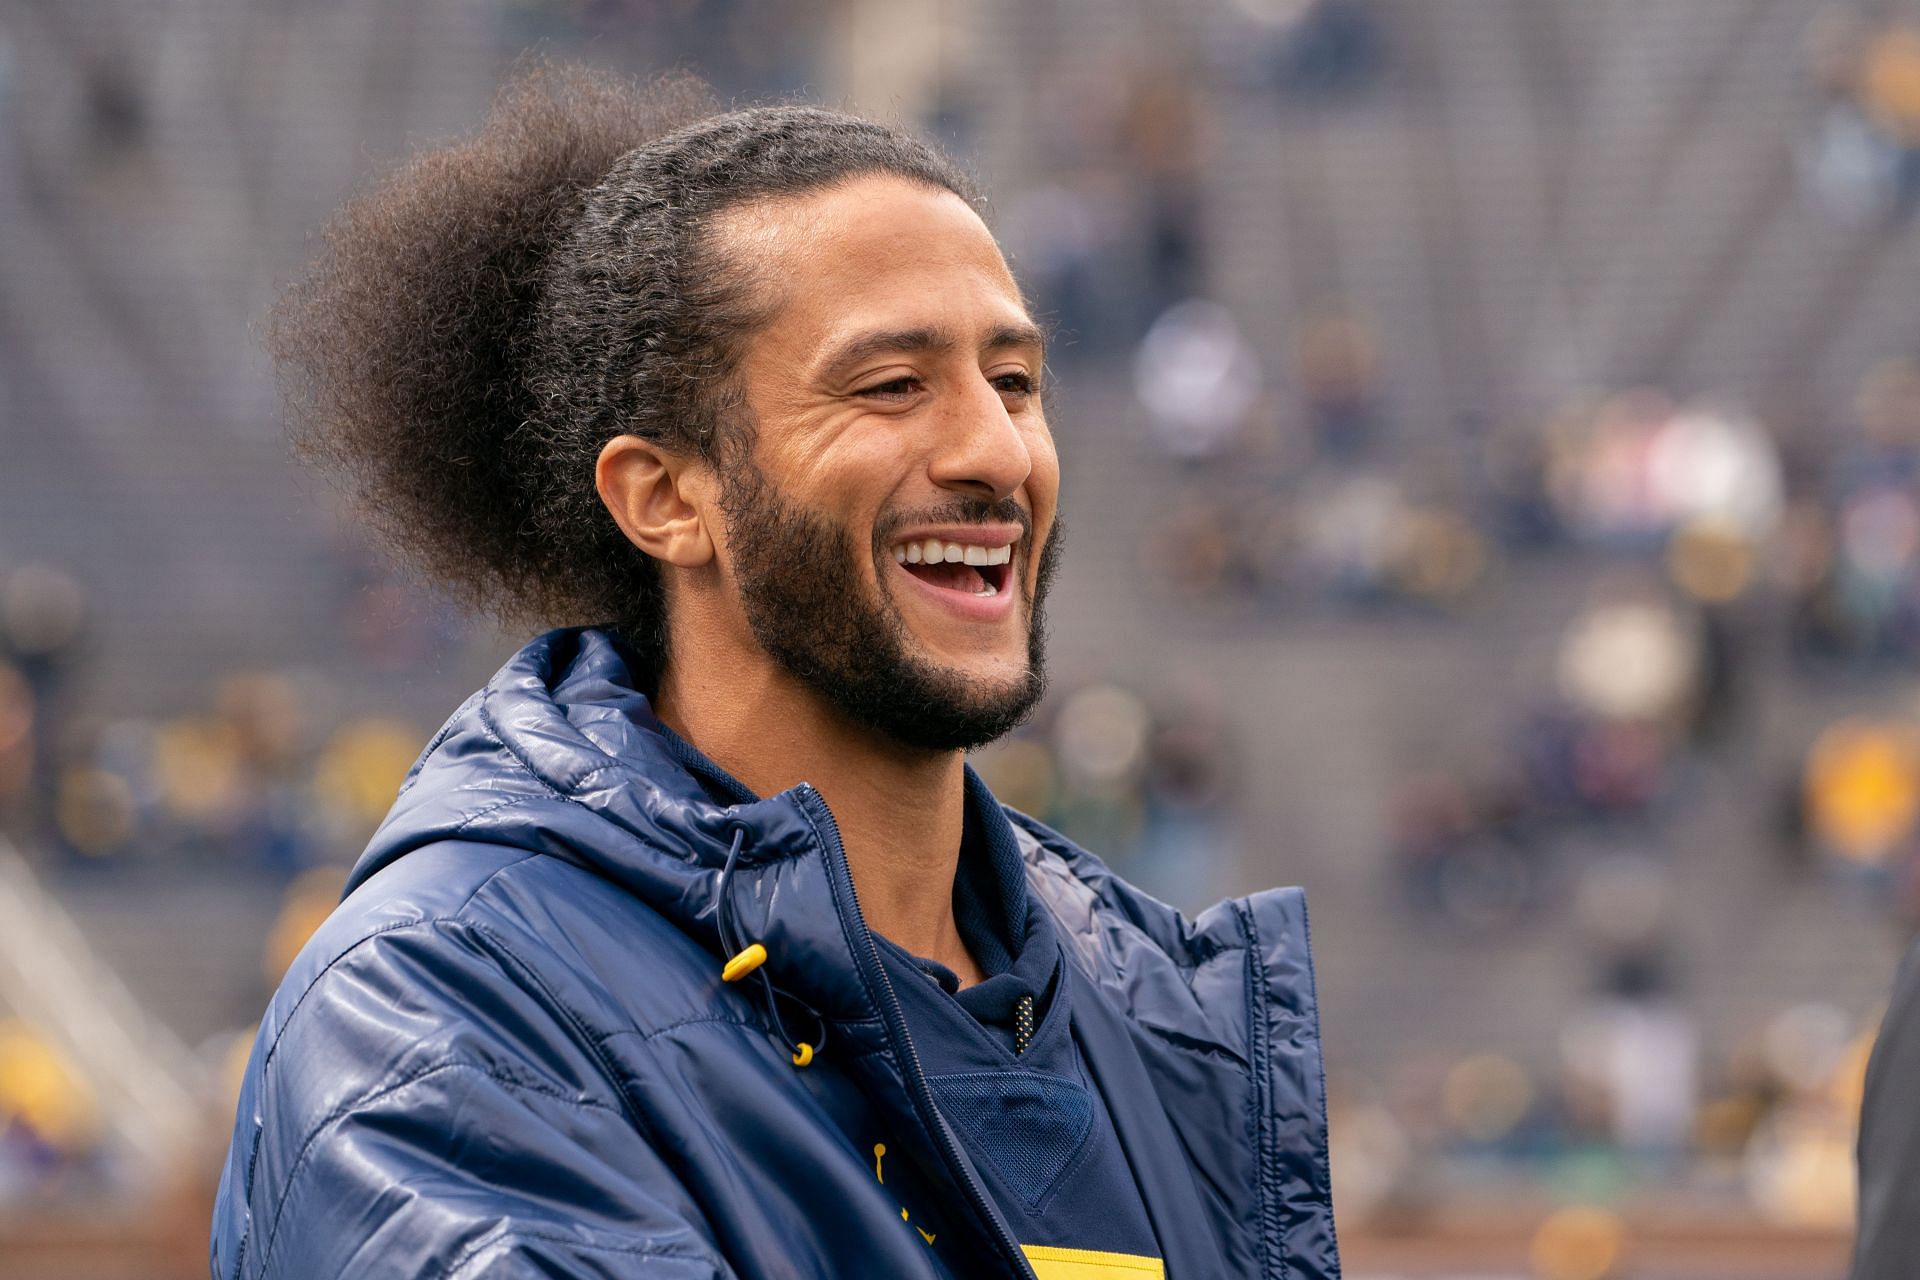 The 35-year-old at the Michigan Spring Game